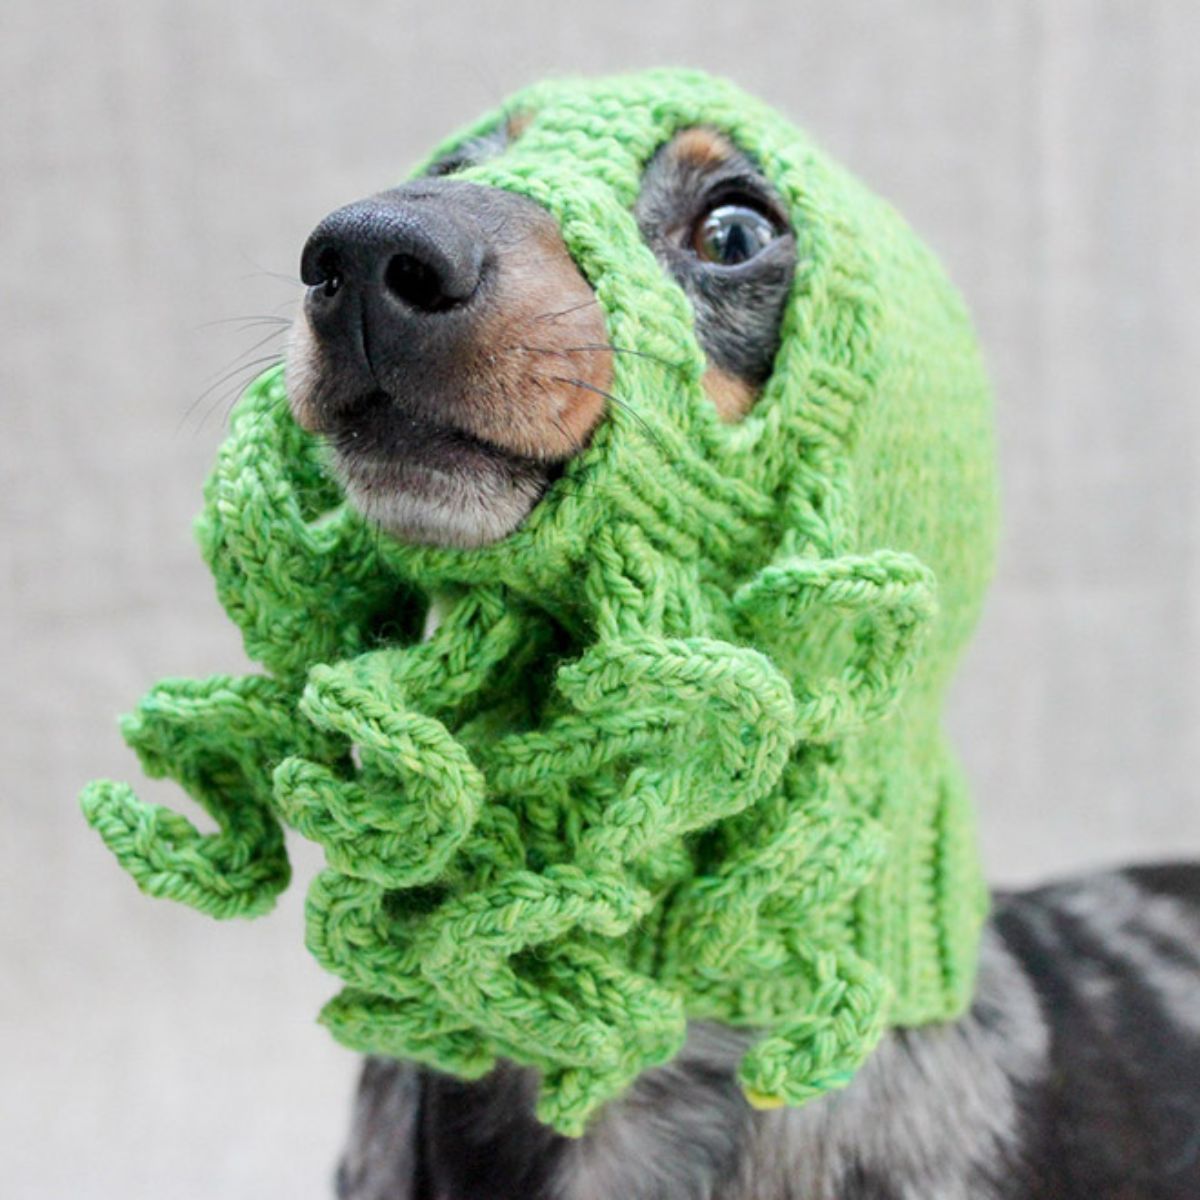 black and brown dachshund wearing a green crocheted squid hat